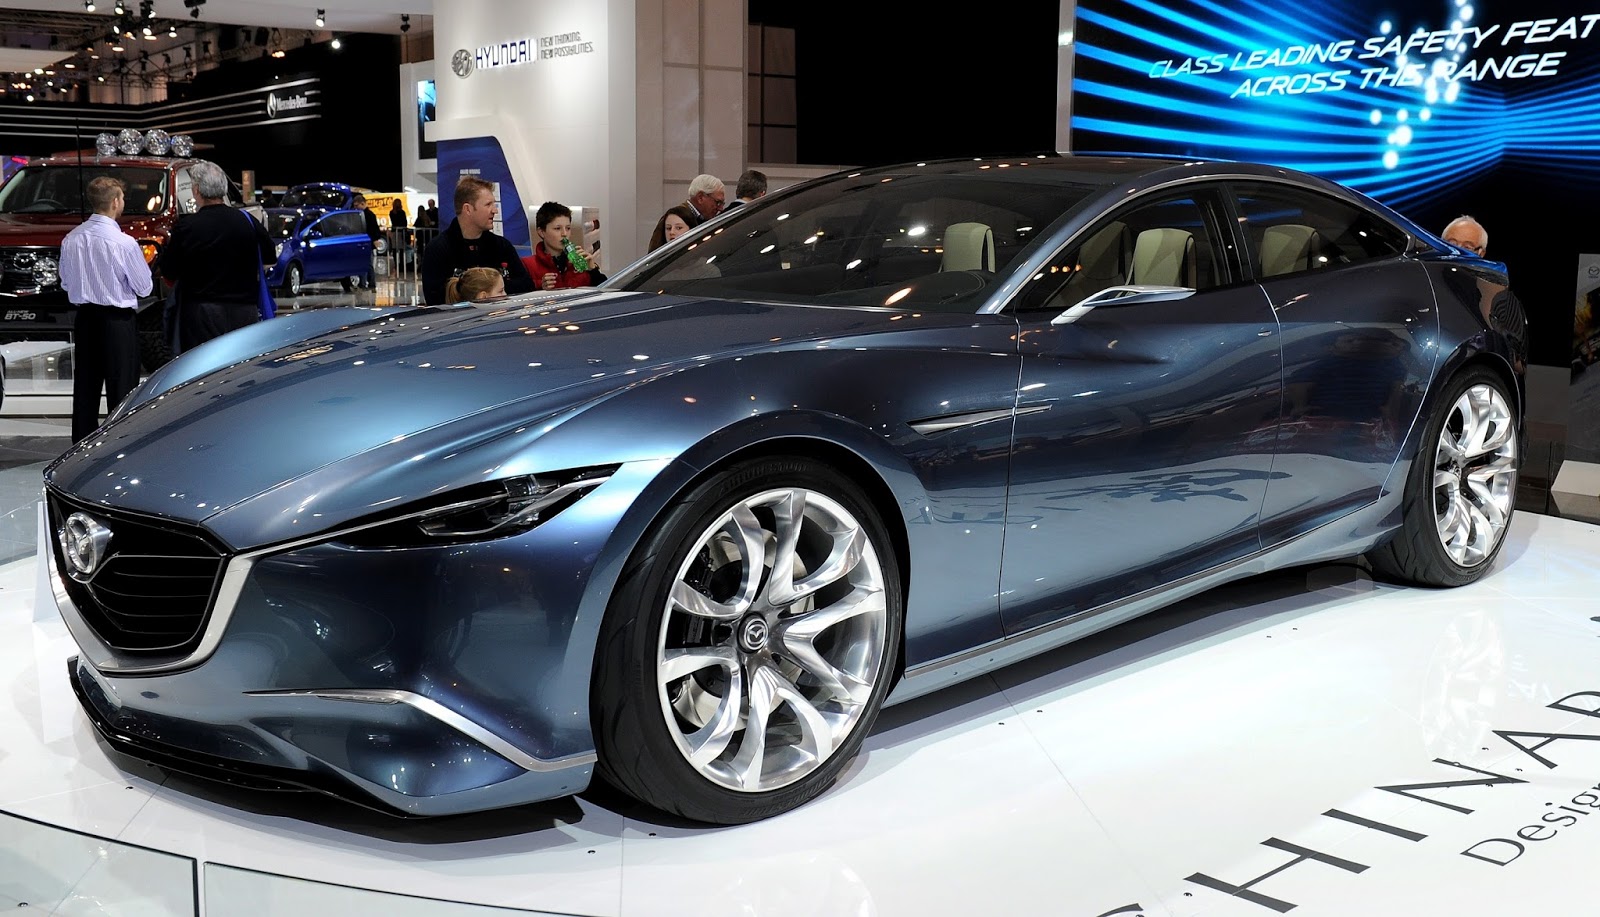 A Mazda Shinari four door four seater sports coupe concept car is displayed at the Australian International Motor Show